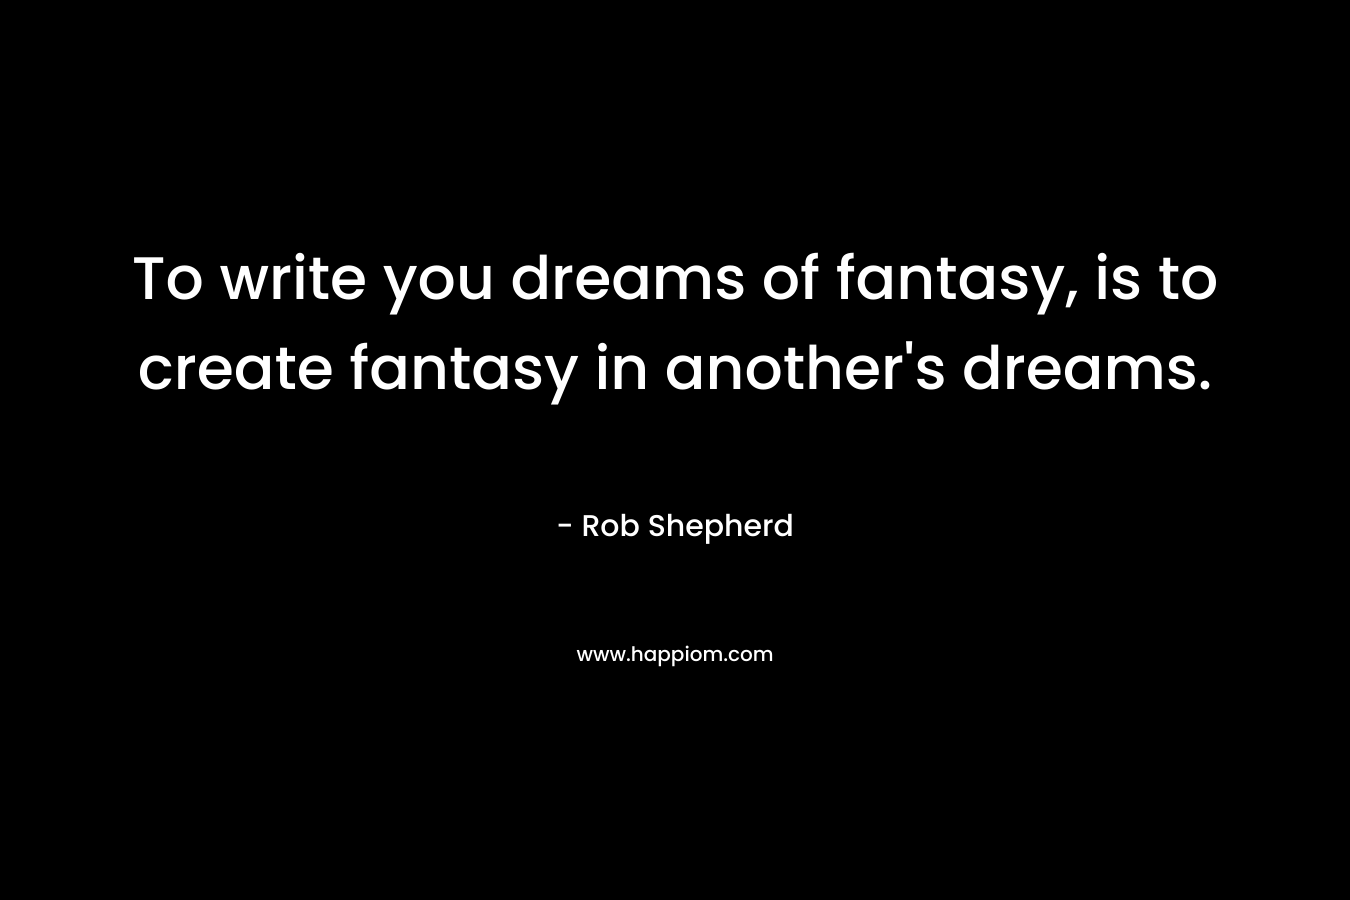 To write you dreams of fantasy, is to create fantasy in another's dreams.